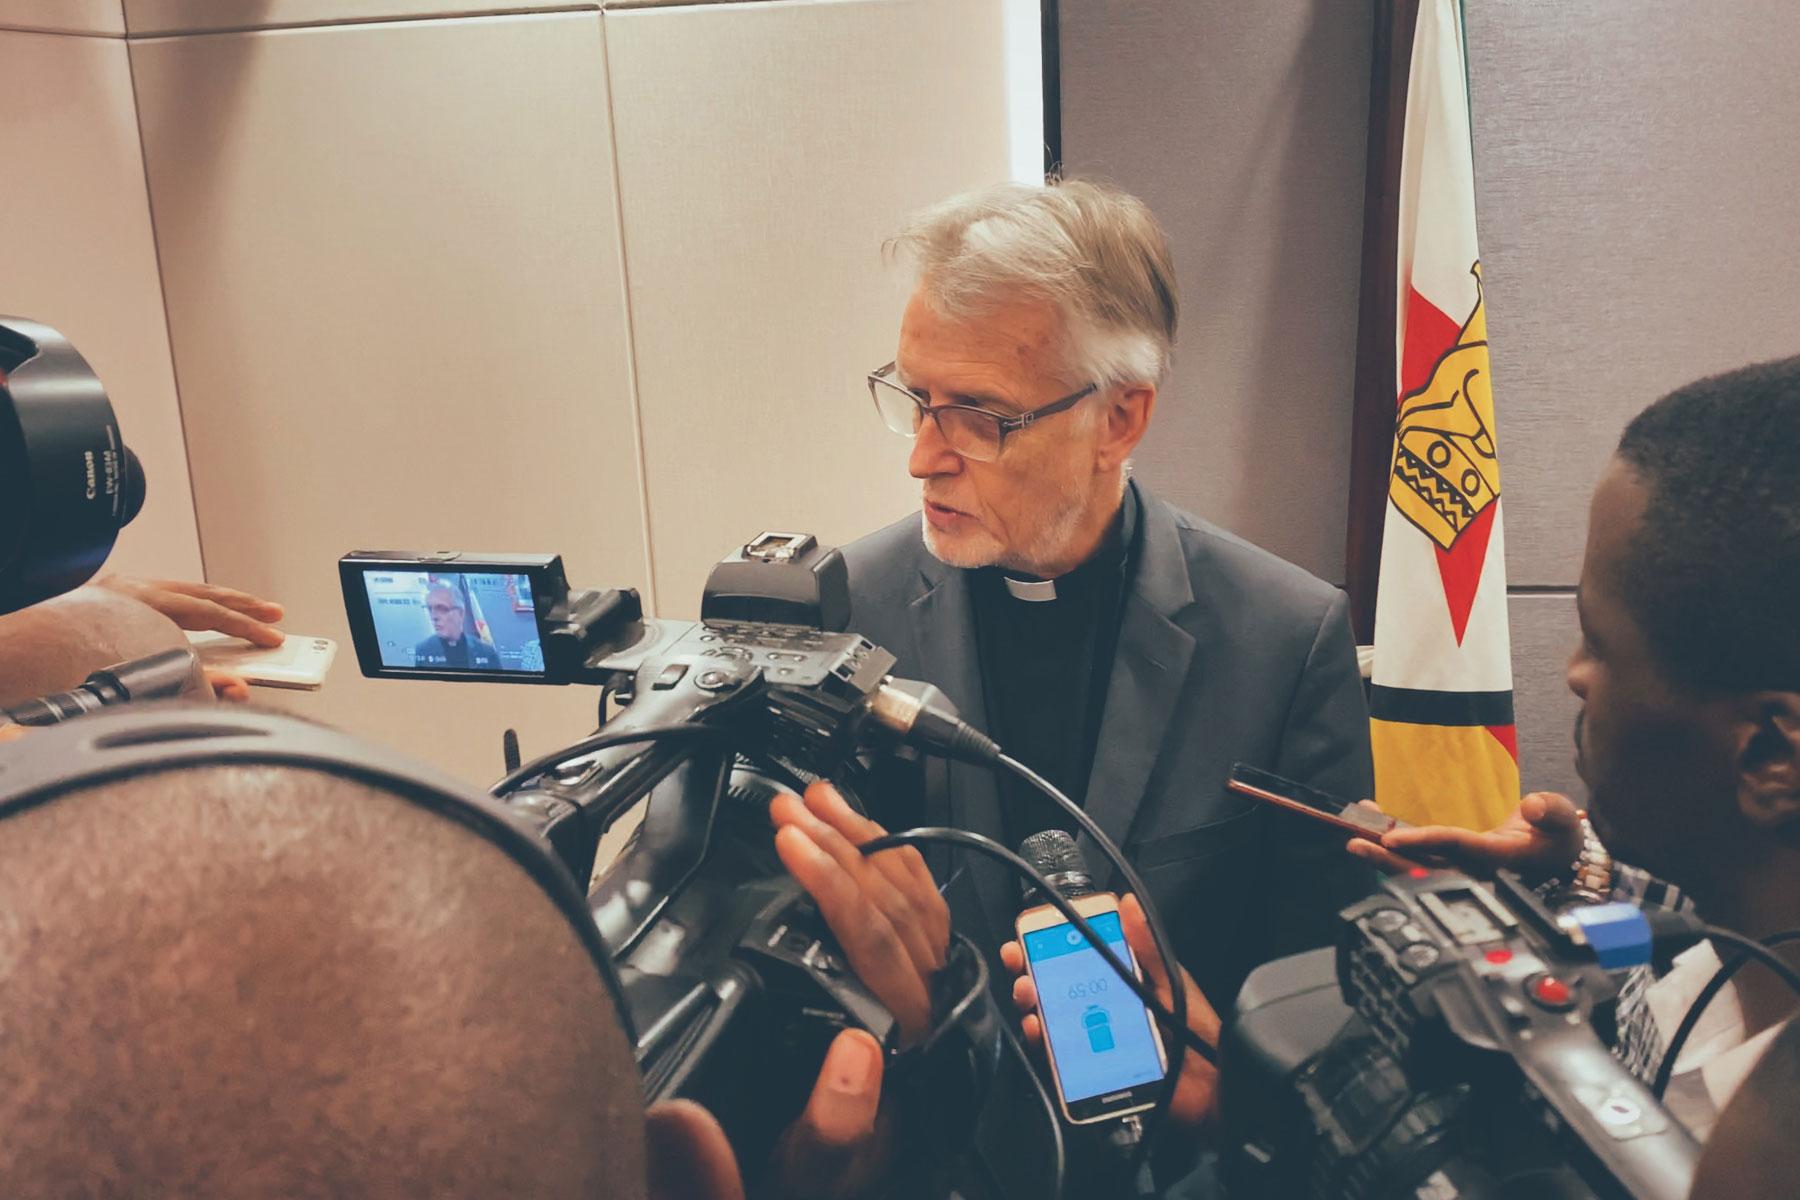 Journalists interview LWF General Secretary Martin Junge following a meeting with government officials in Harare. Photo: LWF/A. Danielsson